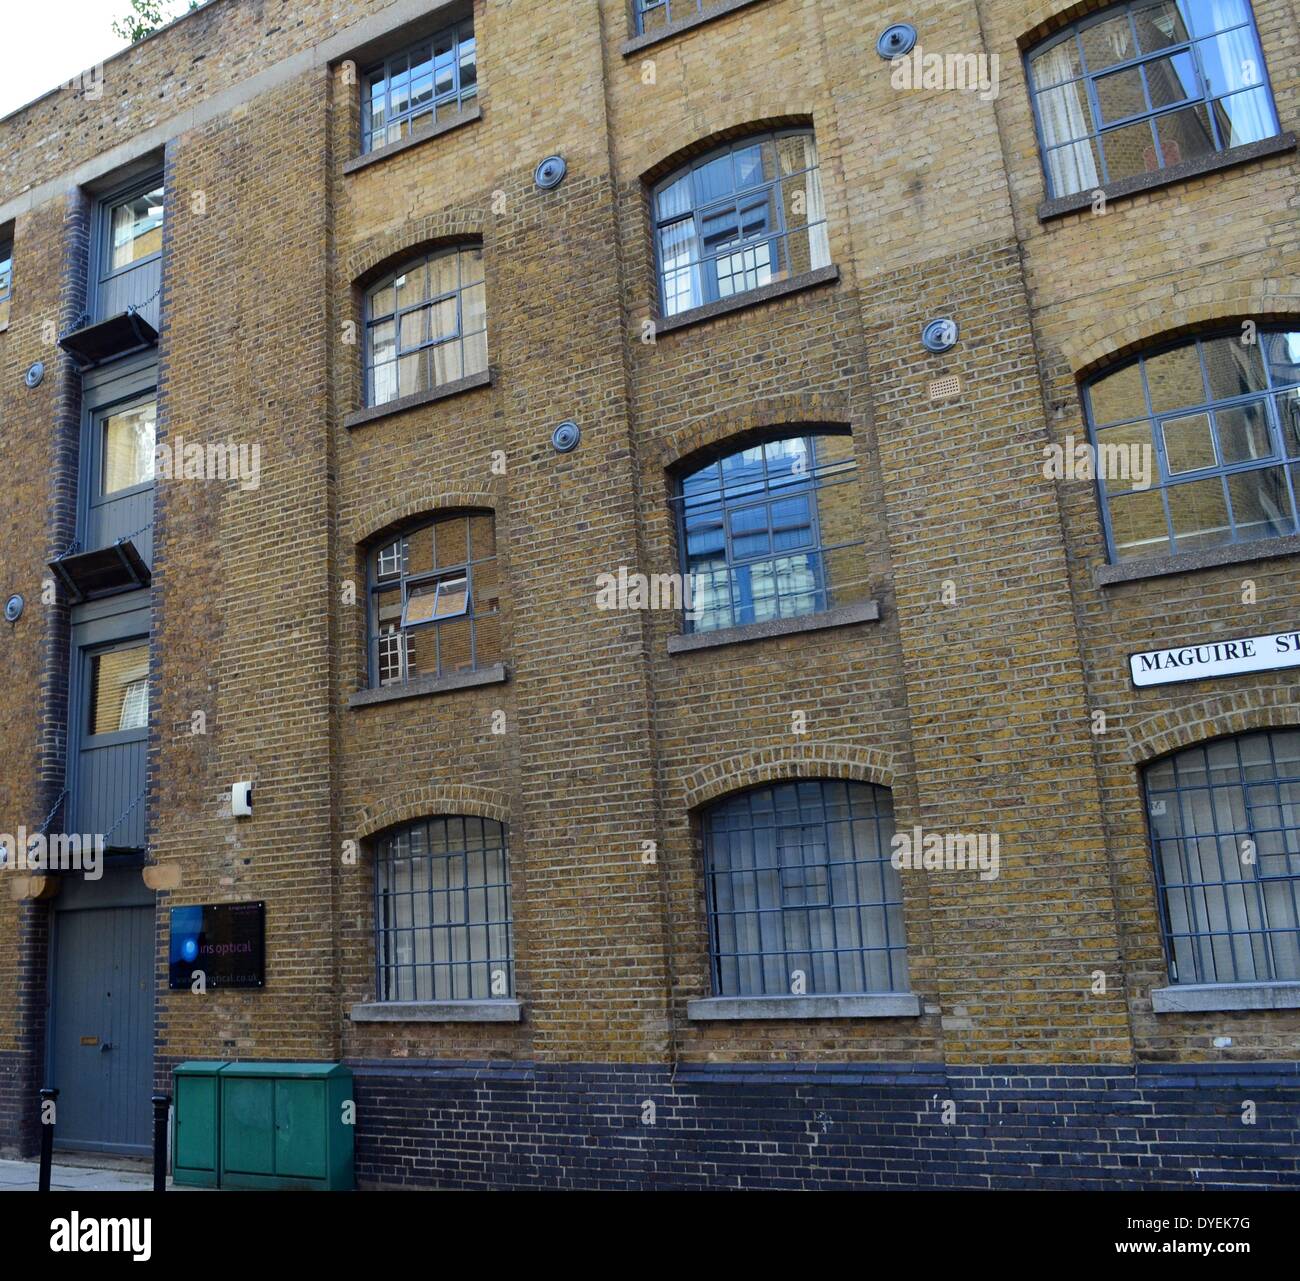 View of Building on Maguire Street London 2013. Stock Photo